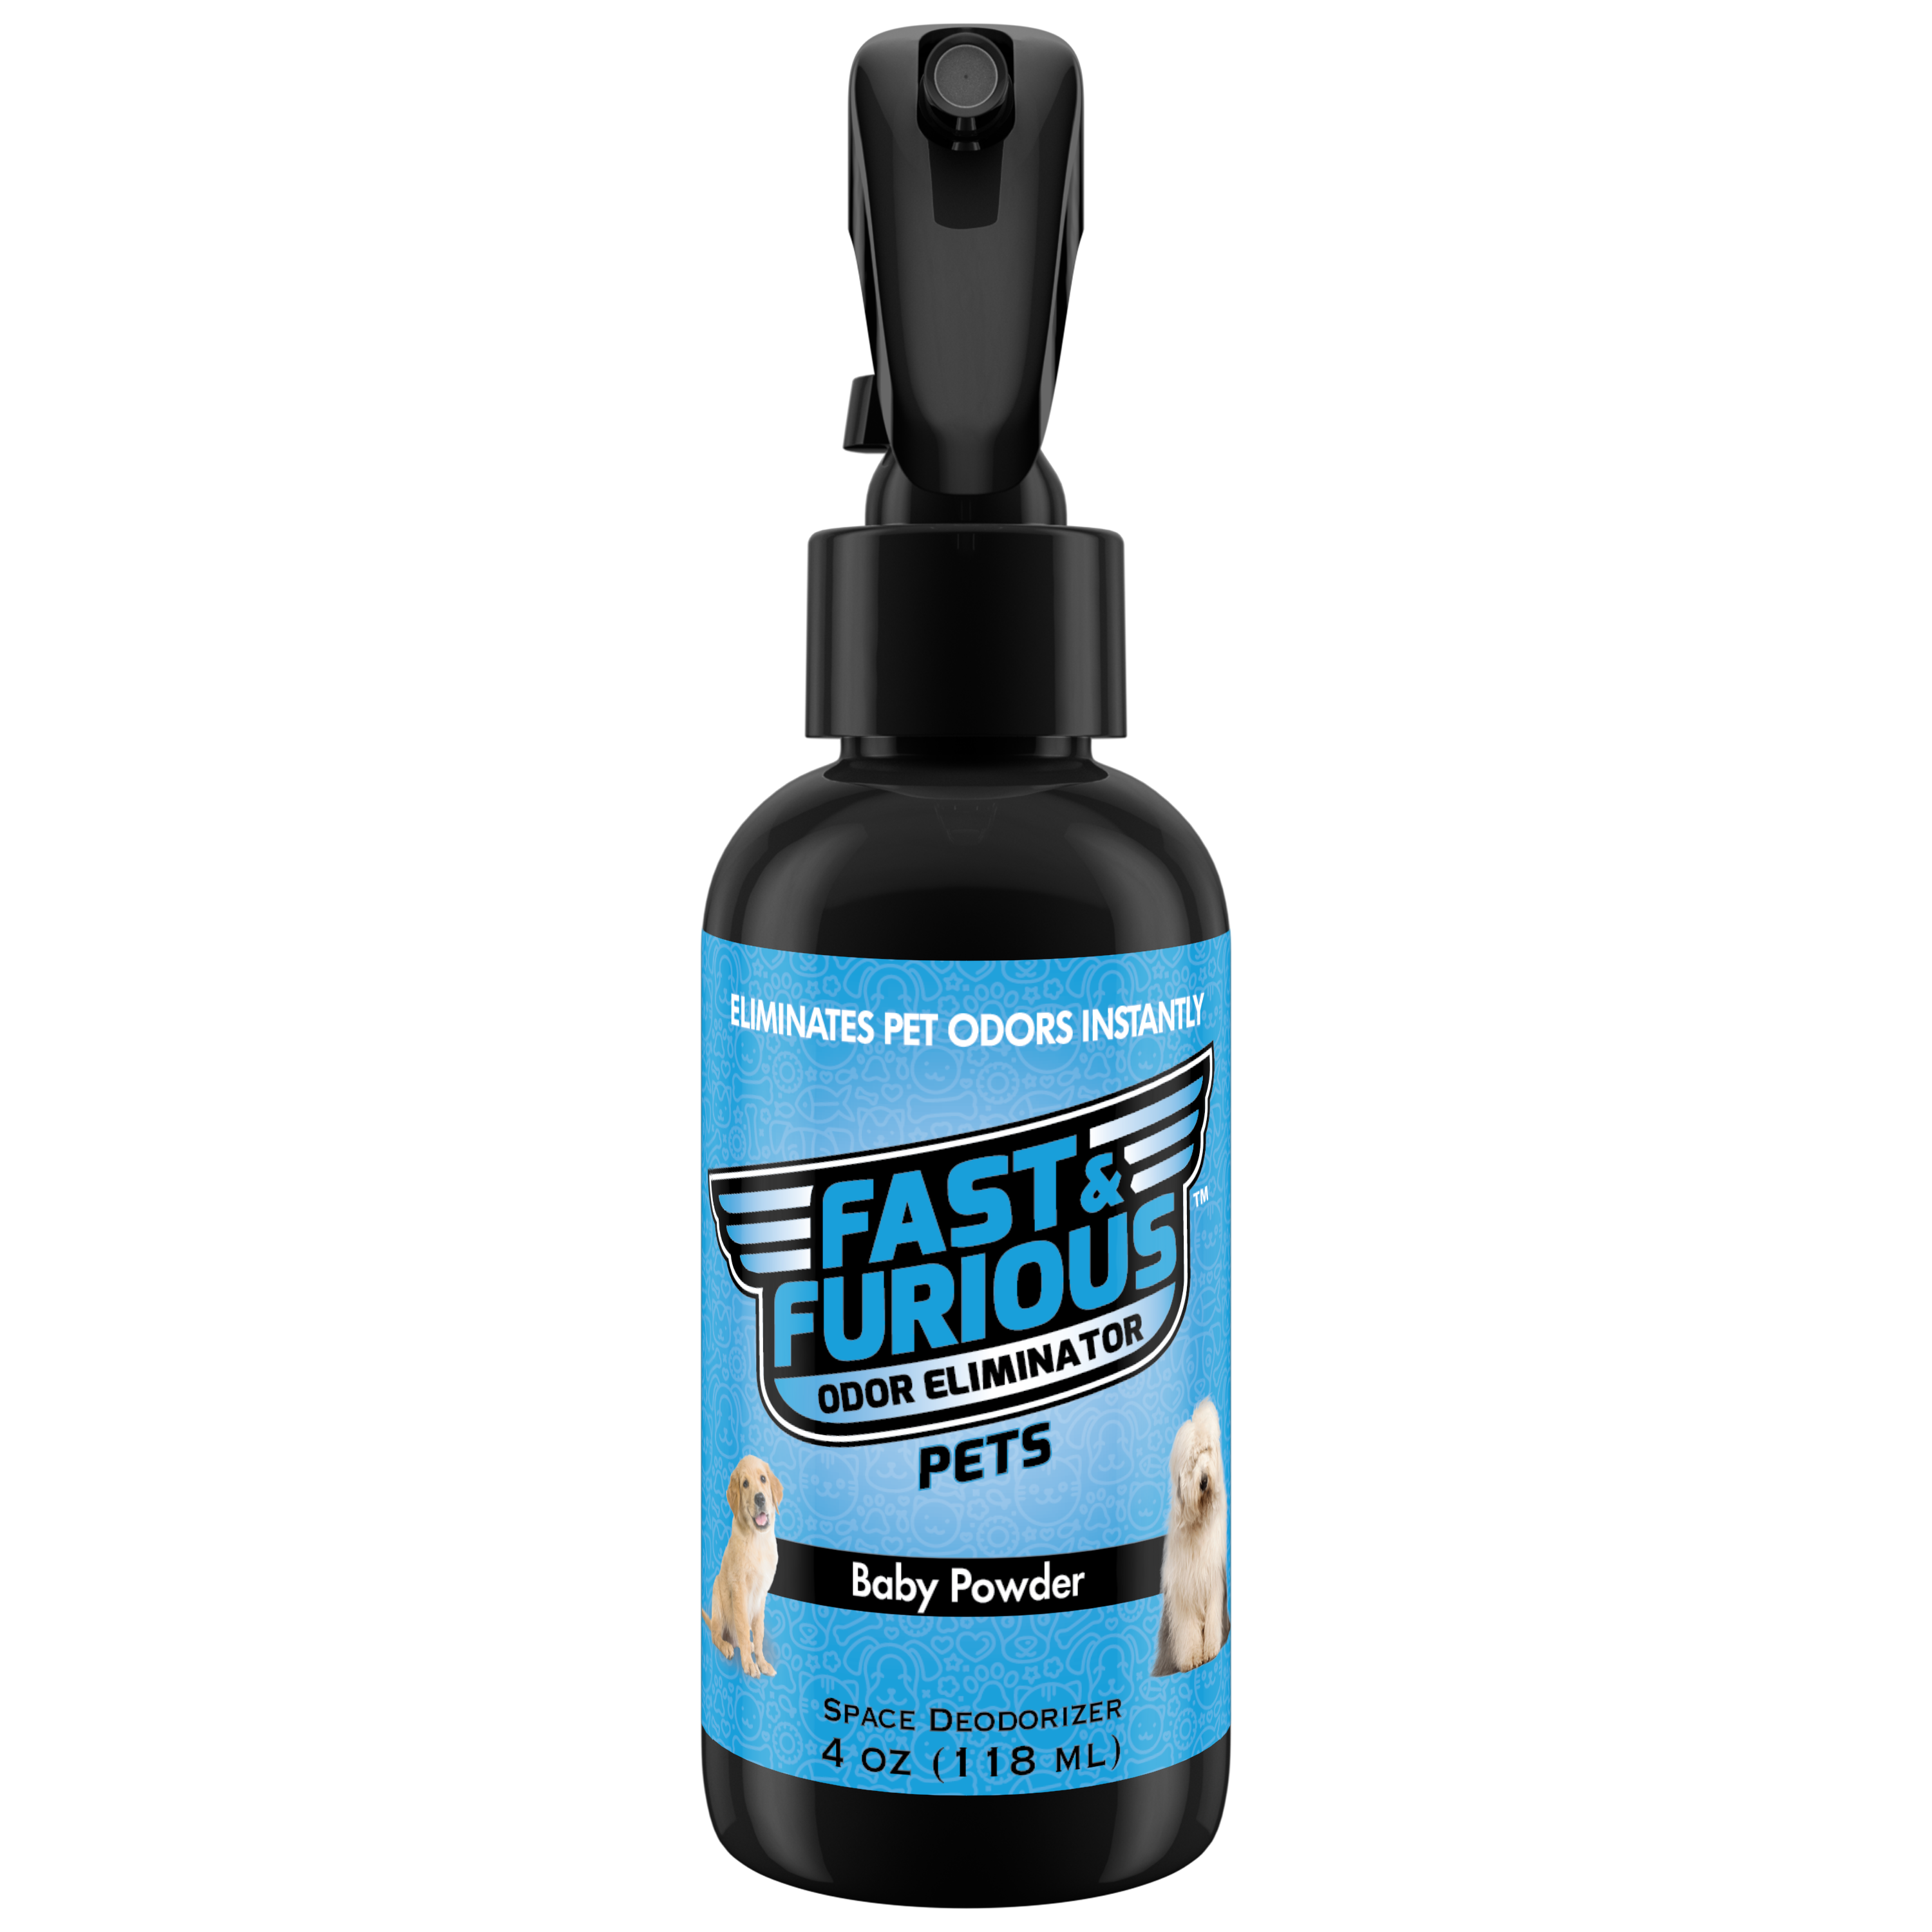 Fast and Furious Pets Odor Eliminator - Baby Powder Scent